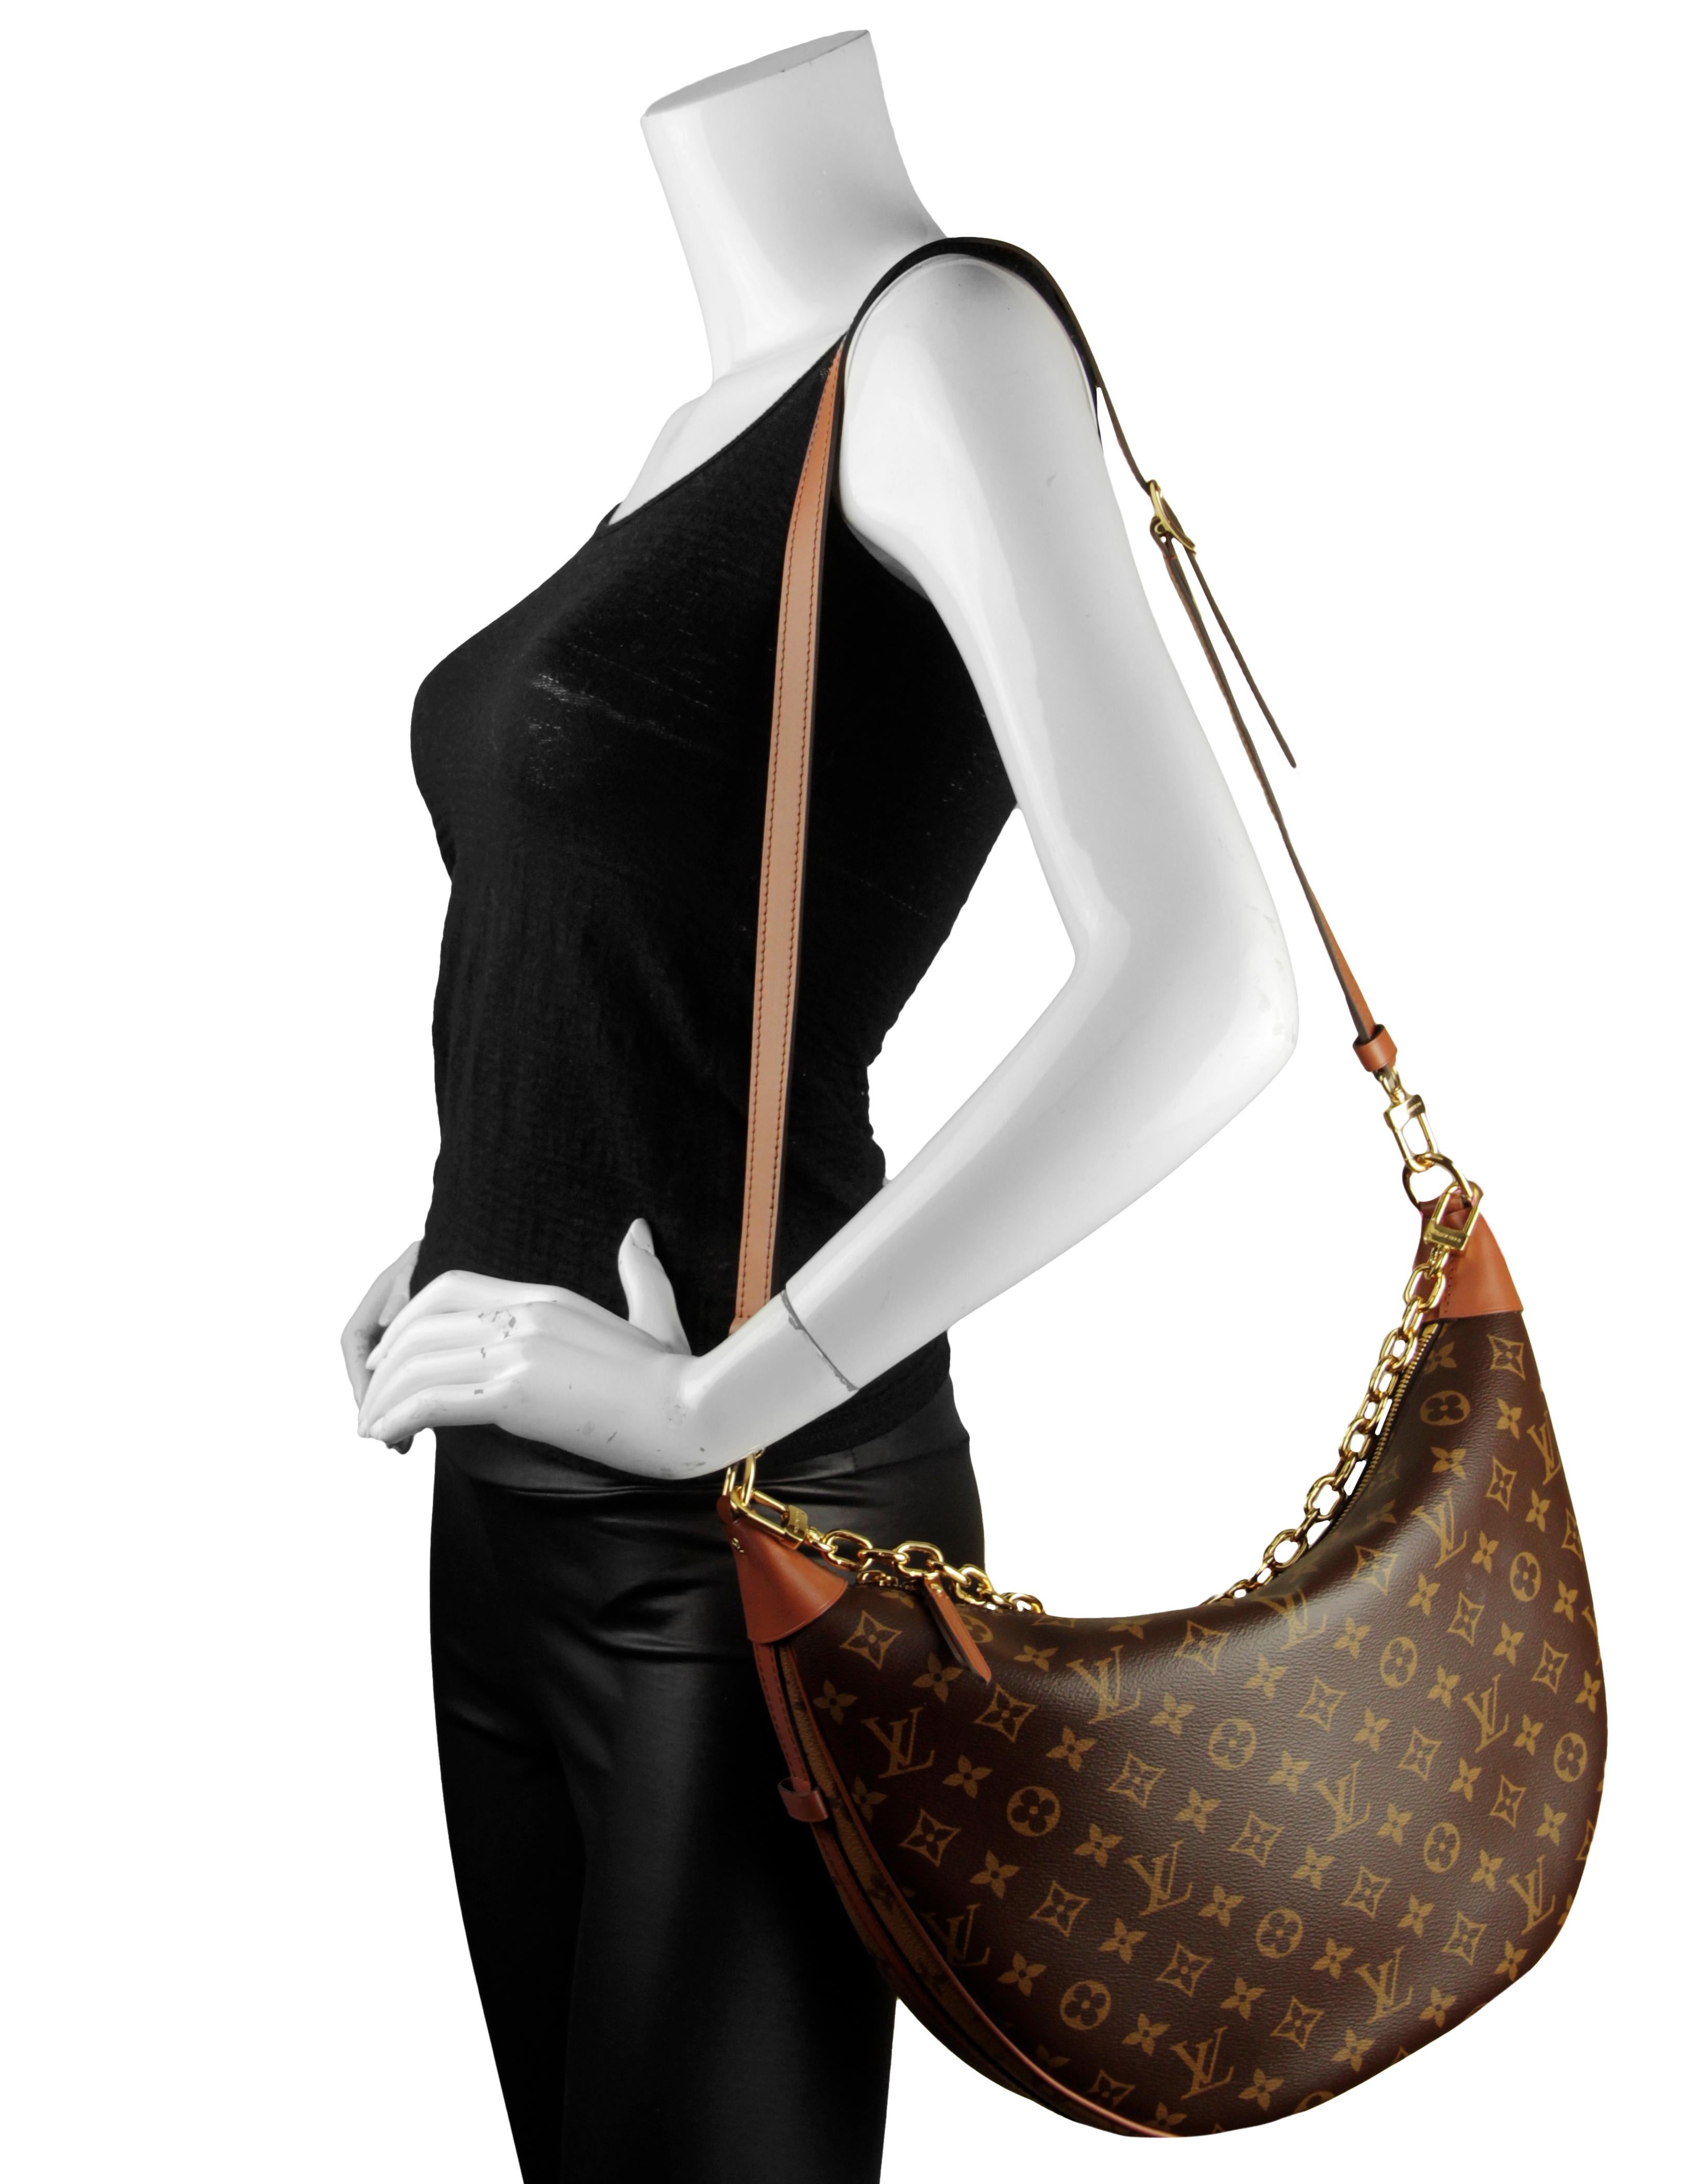 Louis Vuitton Reverse Monogram Loop Hobo Bag. Features removable chain strap and crossbody/shoulder strap.

Made In: USA
Color: Brown and tan
Hardware: Goldtone hardware
Materials: Coated canvas with cowhide leather trim
Lining: Brown